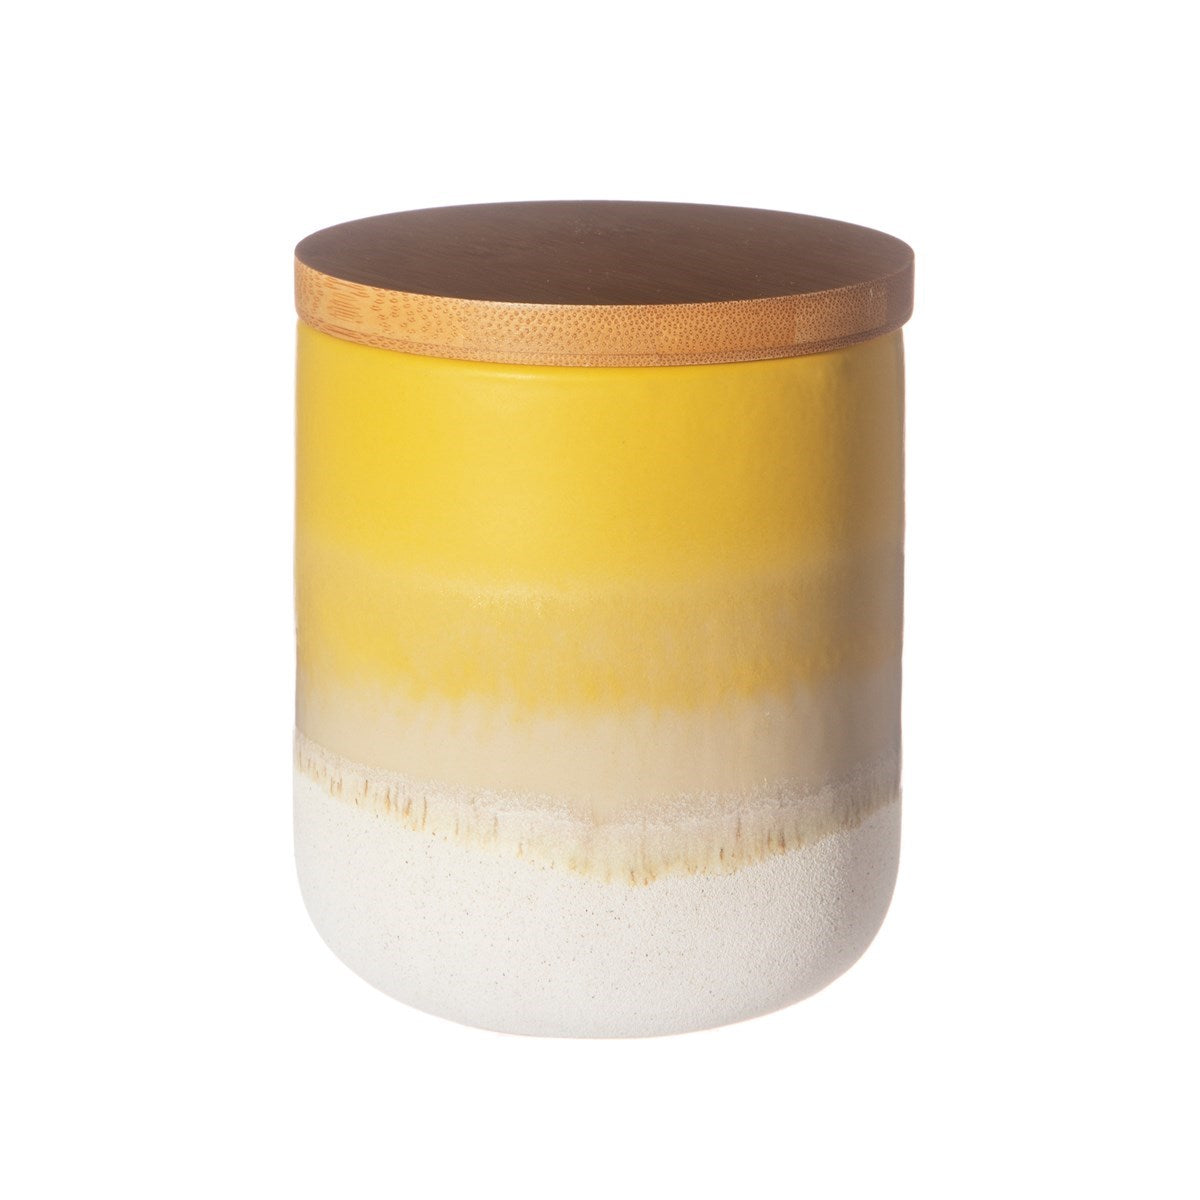 Sass and Belle yellow dip glaze boho style ceramic storage pot with wooden lid